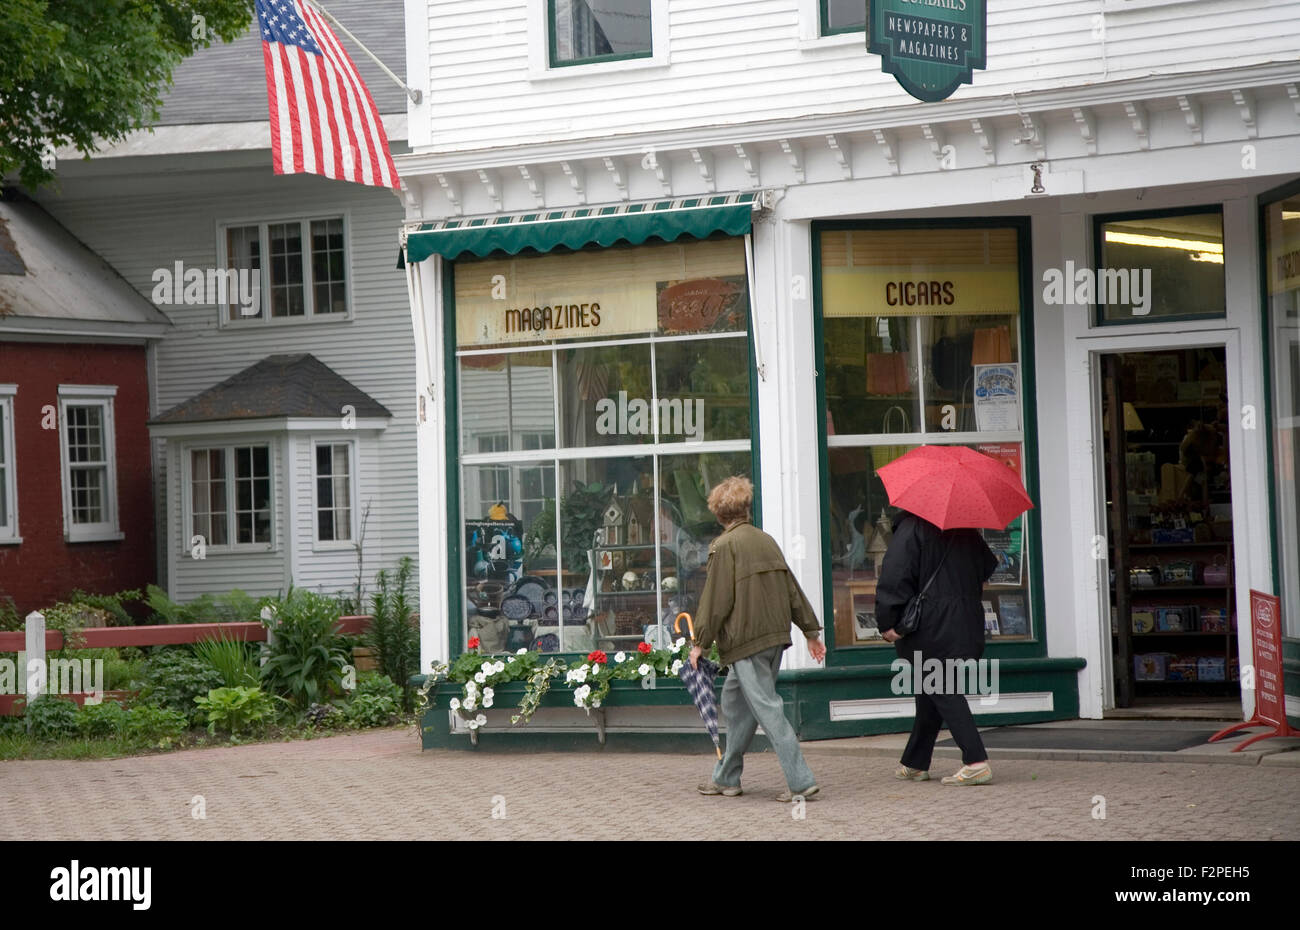 Street scene with American flag, Stowe, Vermont, USA Stock Photo